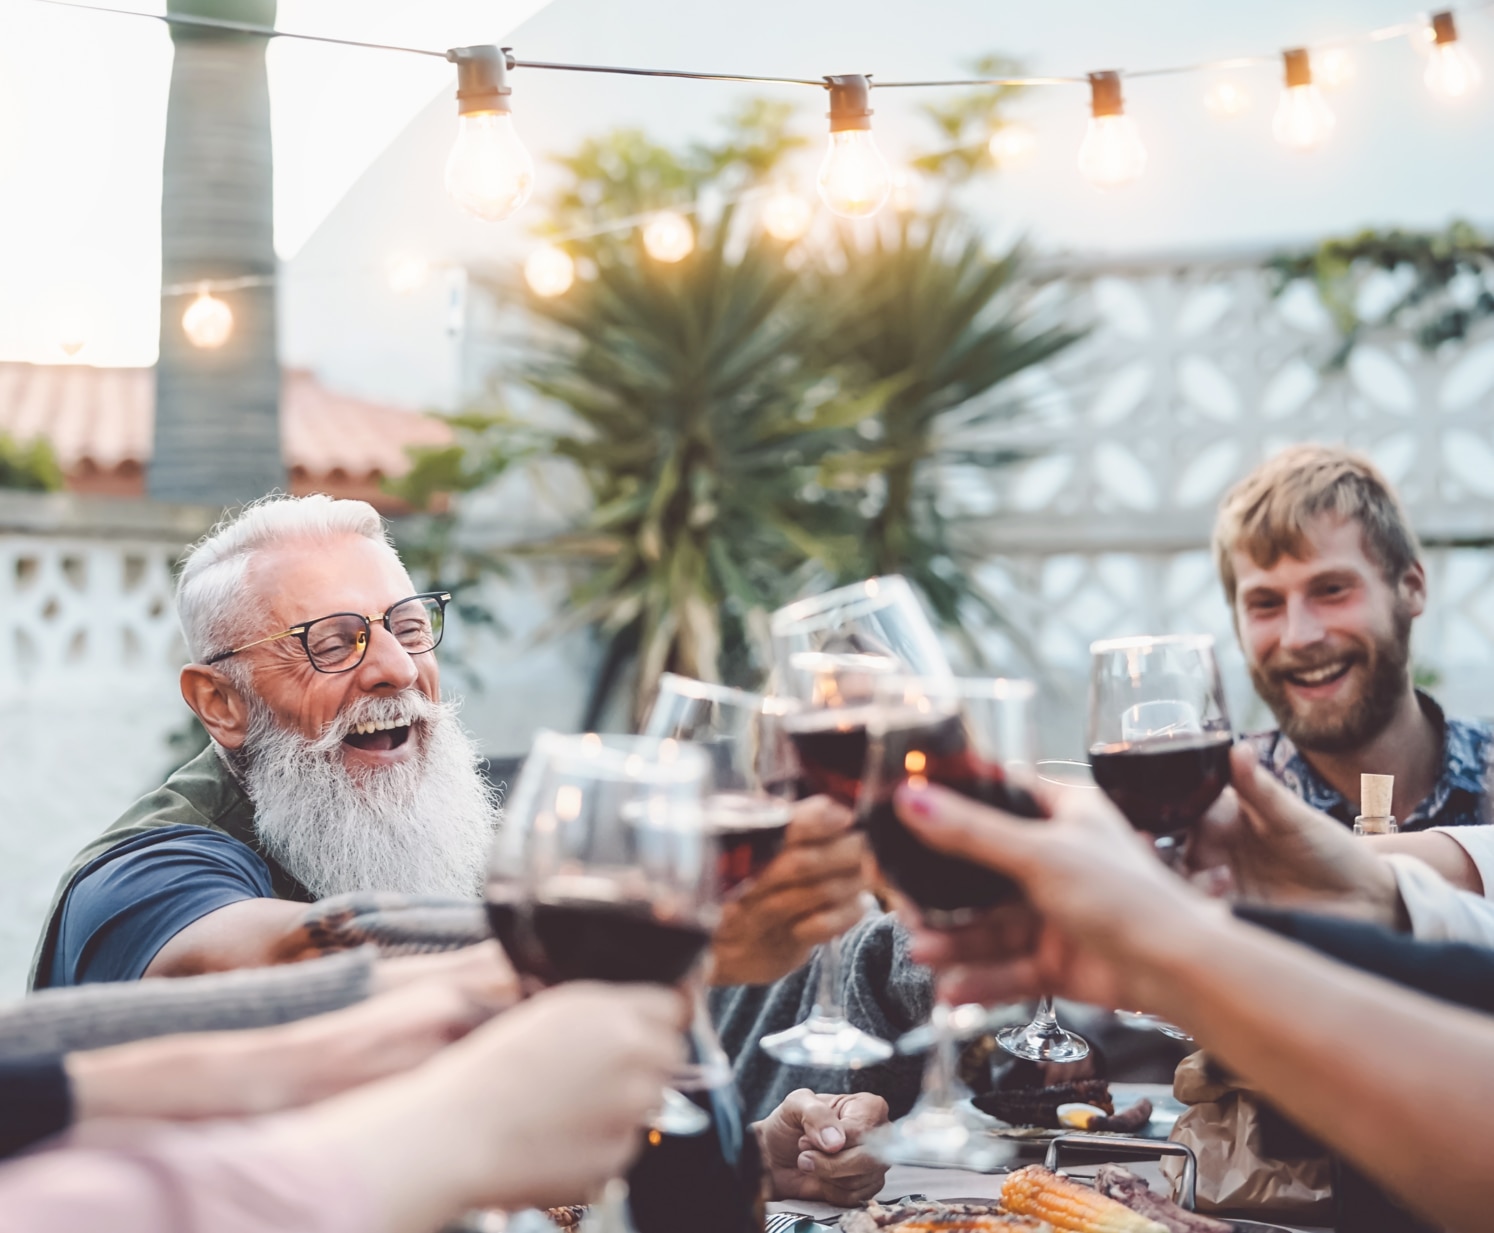 Happy family dining and toasting red wine glasses outdoor - People with different ages and ethnicity having fun in barbecue dinner party - Parenthood youth and elderly weekend activities concept